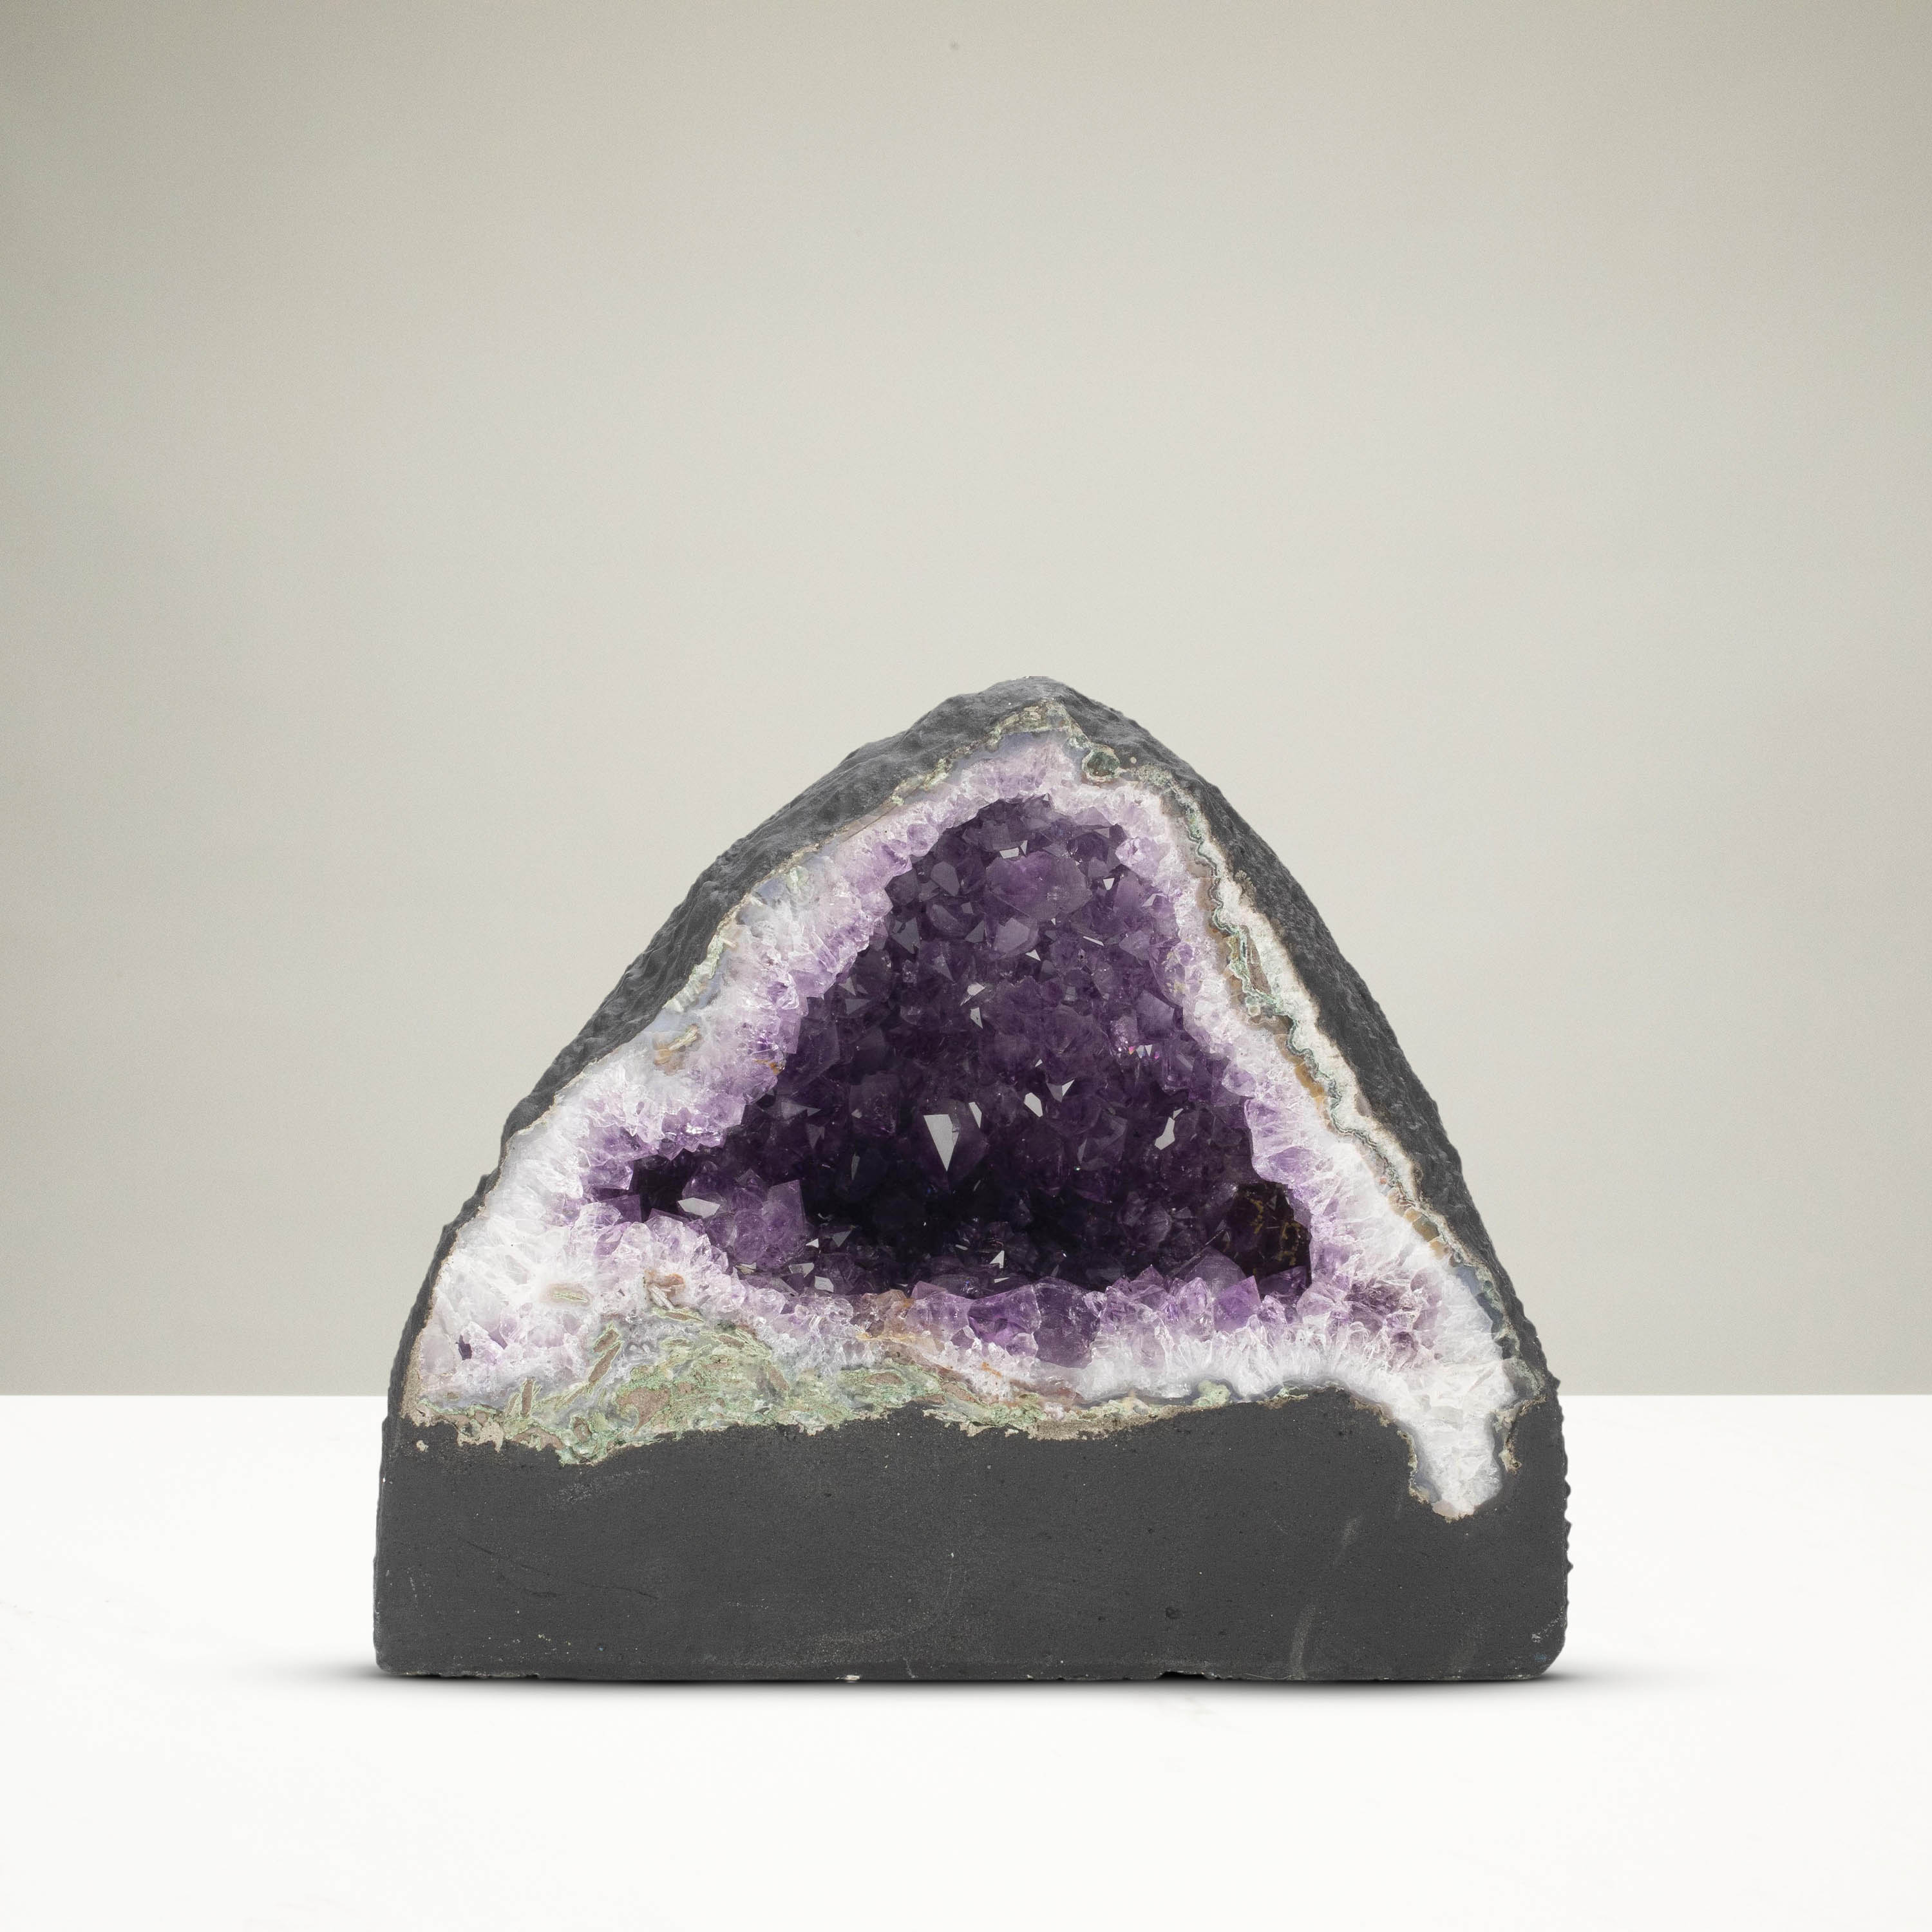 Kalifano Amethyst Amethyst Geode Cathedral - 8" / 17 lbs BAG2400.019